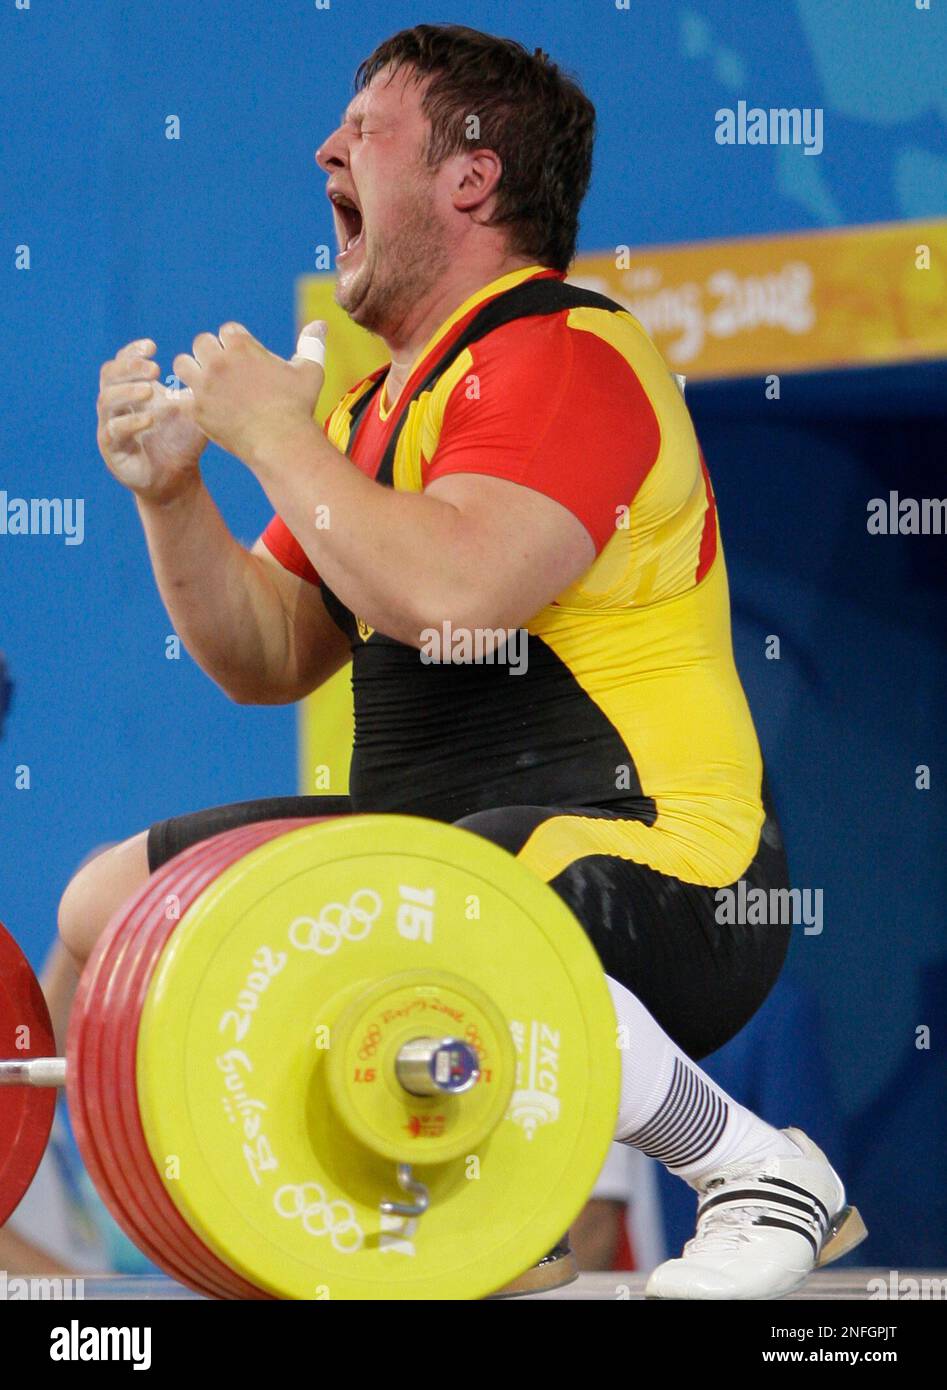 Gold medalist, Matthias Steiner of Germany celebrates a successful lift in the mens +105 kg, weightlifting competition at the Beijing 2008 Olympics in Beijing, Tuesday, Aug